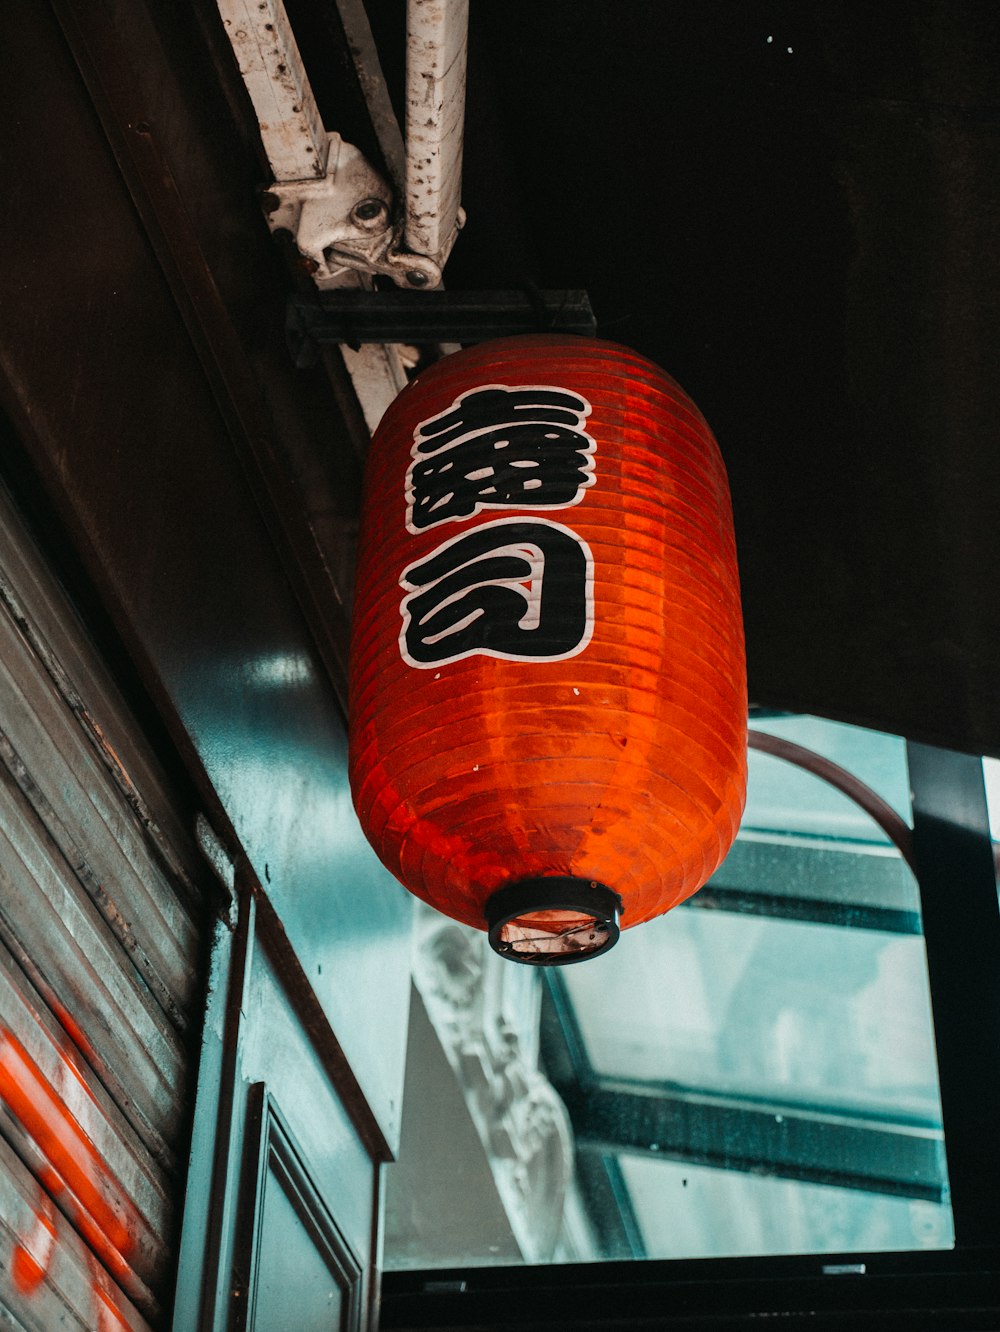 a red lantern hanging from the ceiling of a building